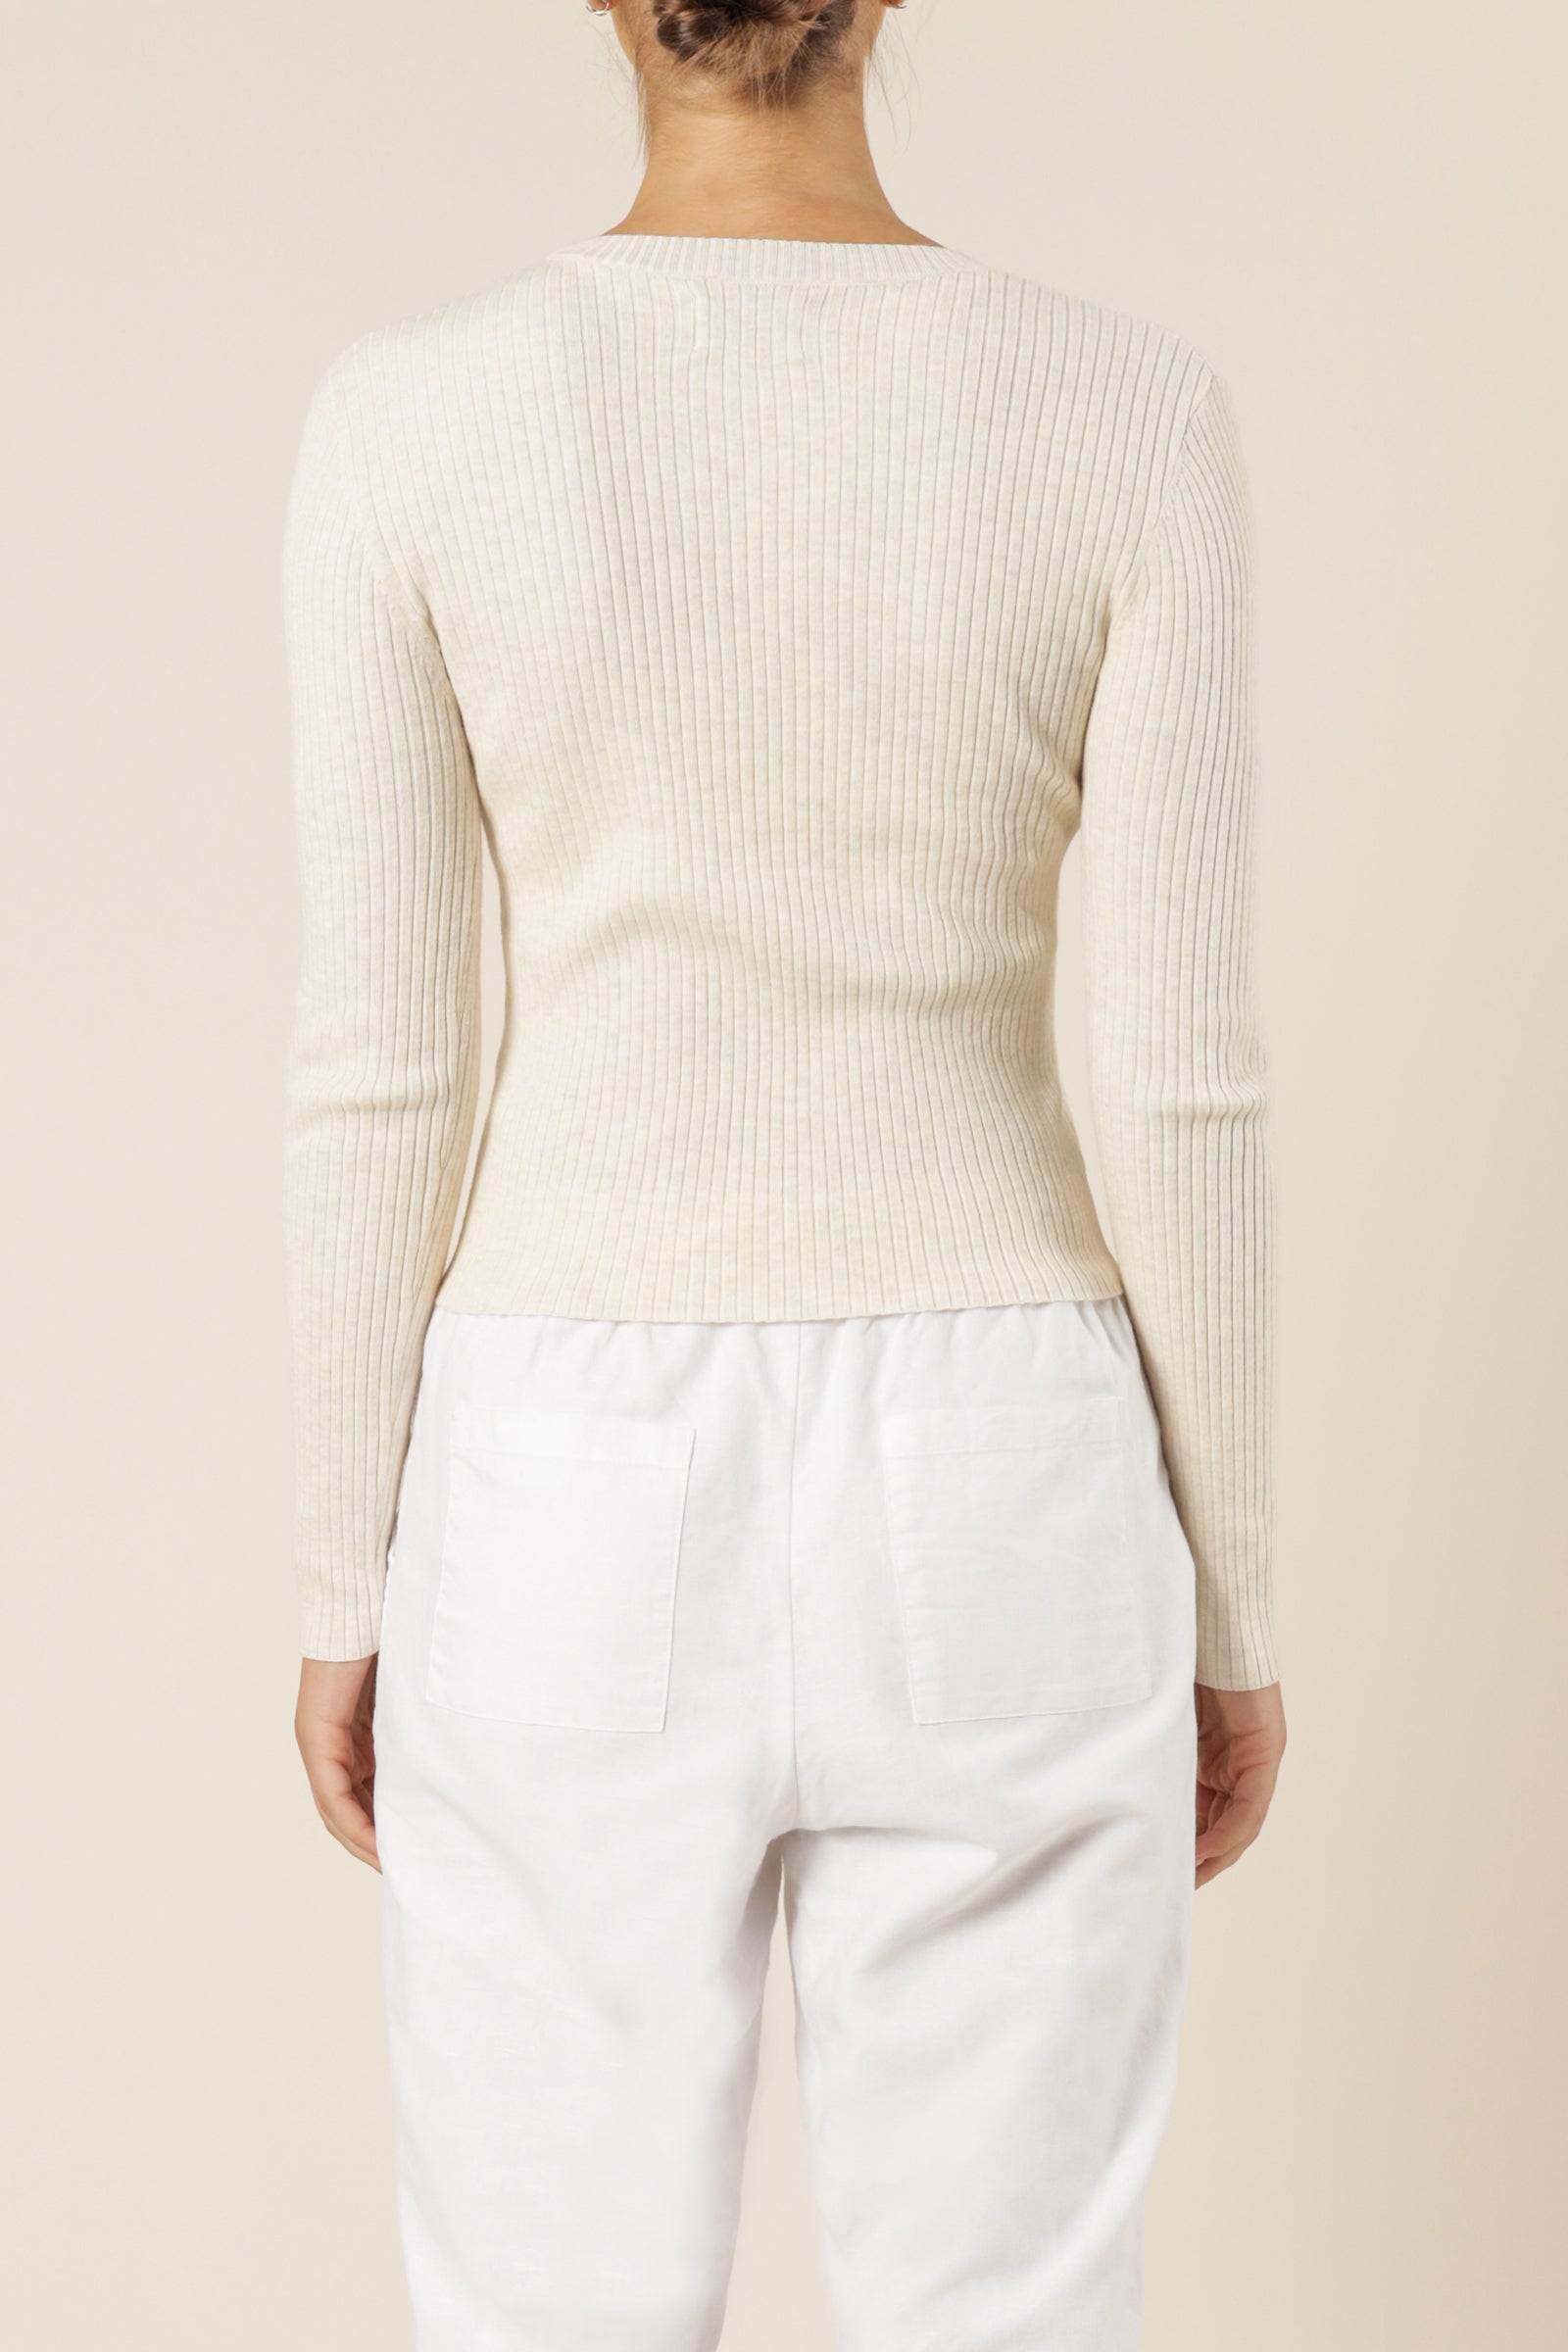 Nude Lucy nude classic knit snow marle knits